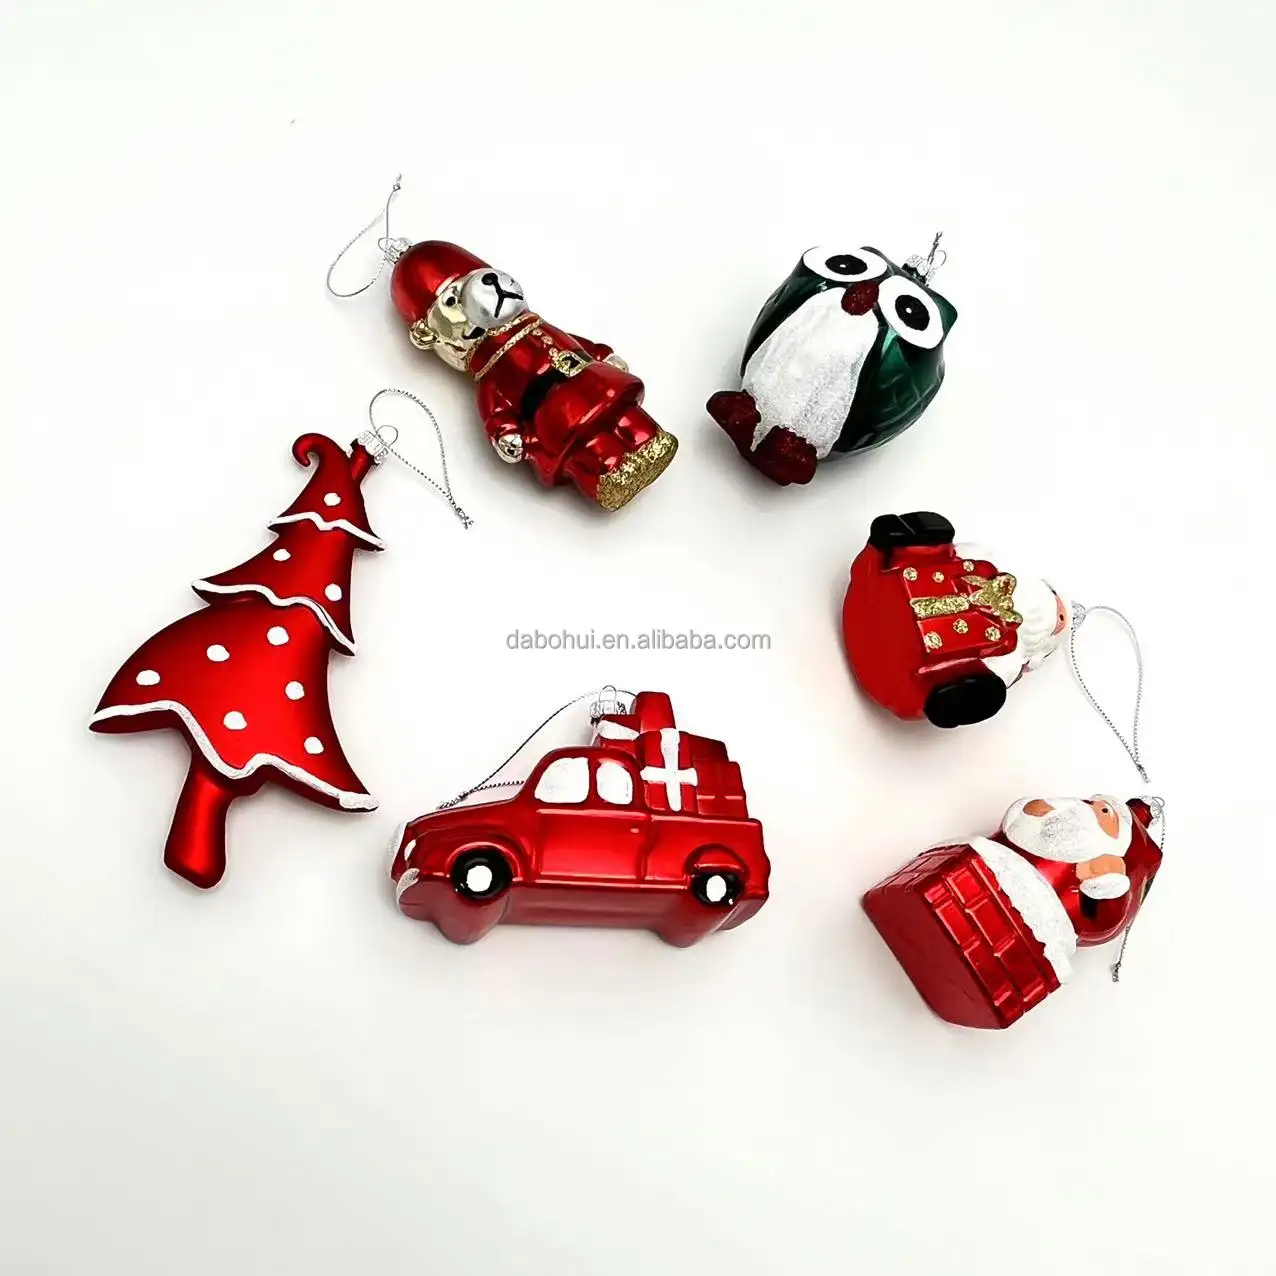 New Promotion Hot Style Wholesale Colorful christmas hanging baubles Santa Claus christmas tree toys car owl